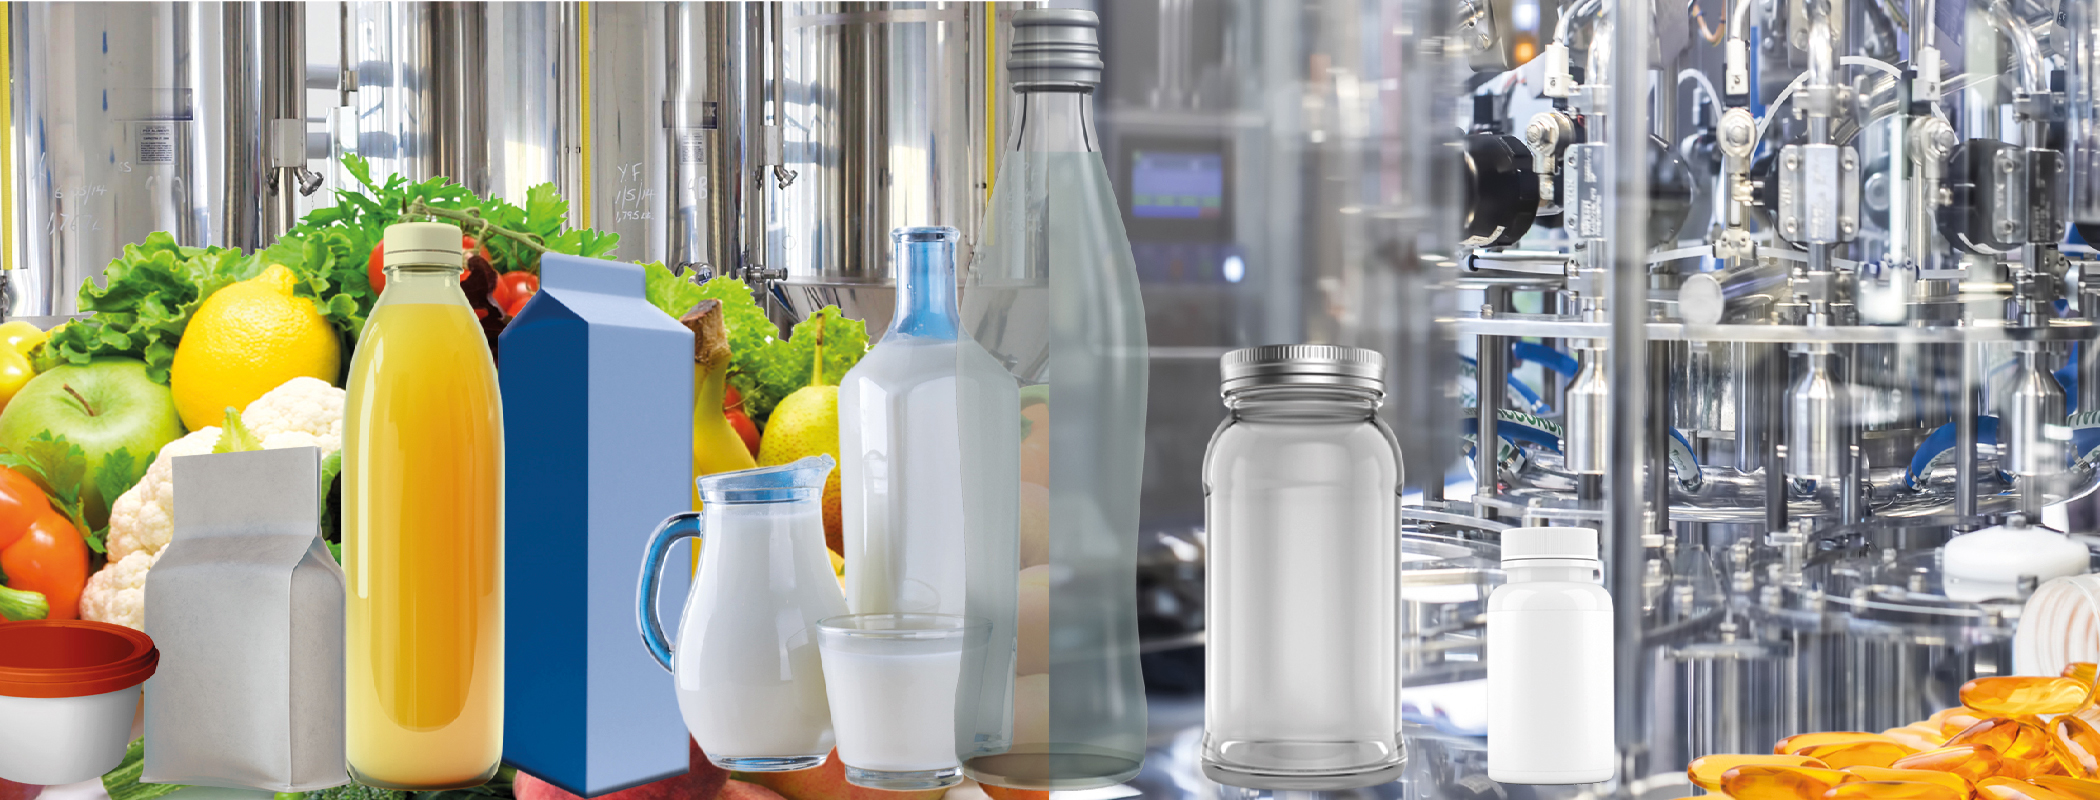 Ultrasonic sensors in the food and pharmaceutical industries